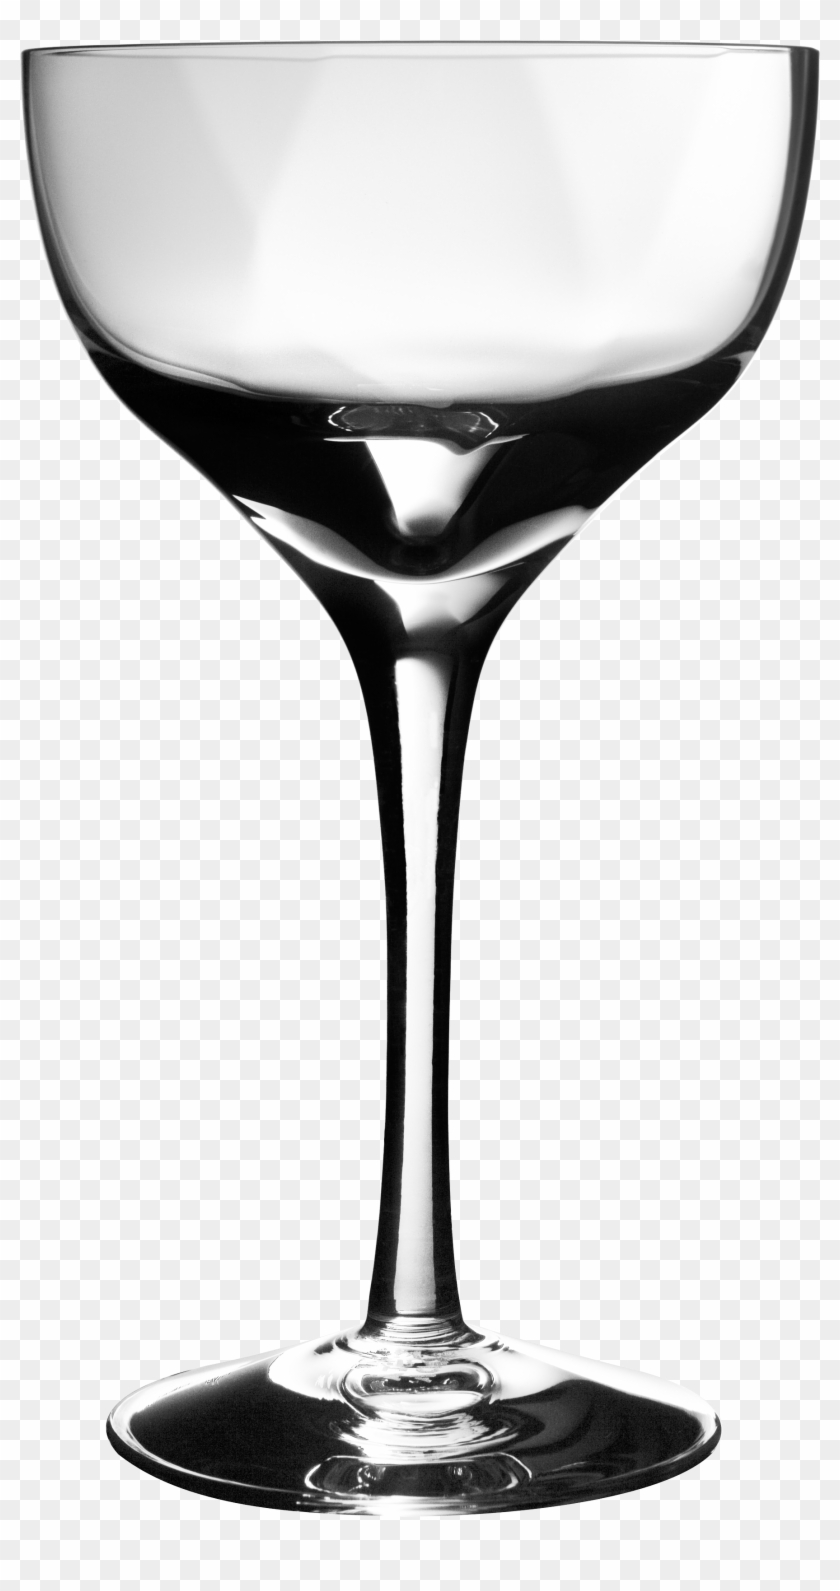 Empty Wine Glass Png Image - Empty Wine Glass Png #463317